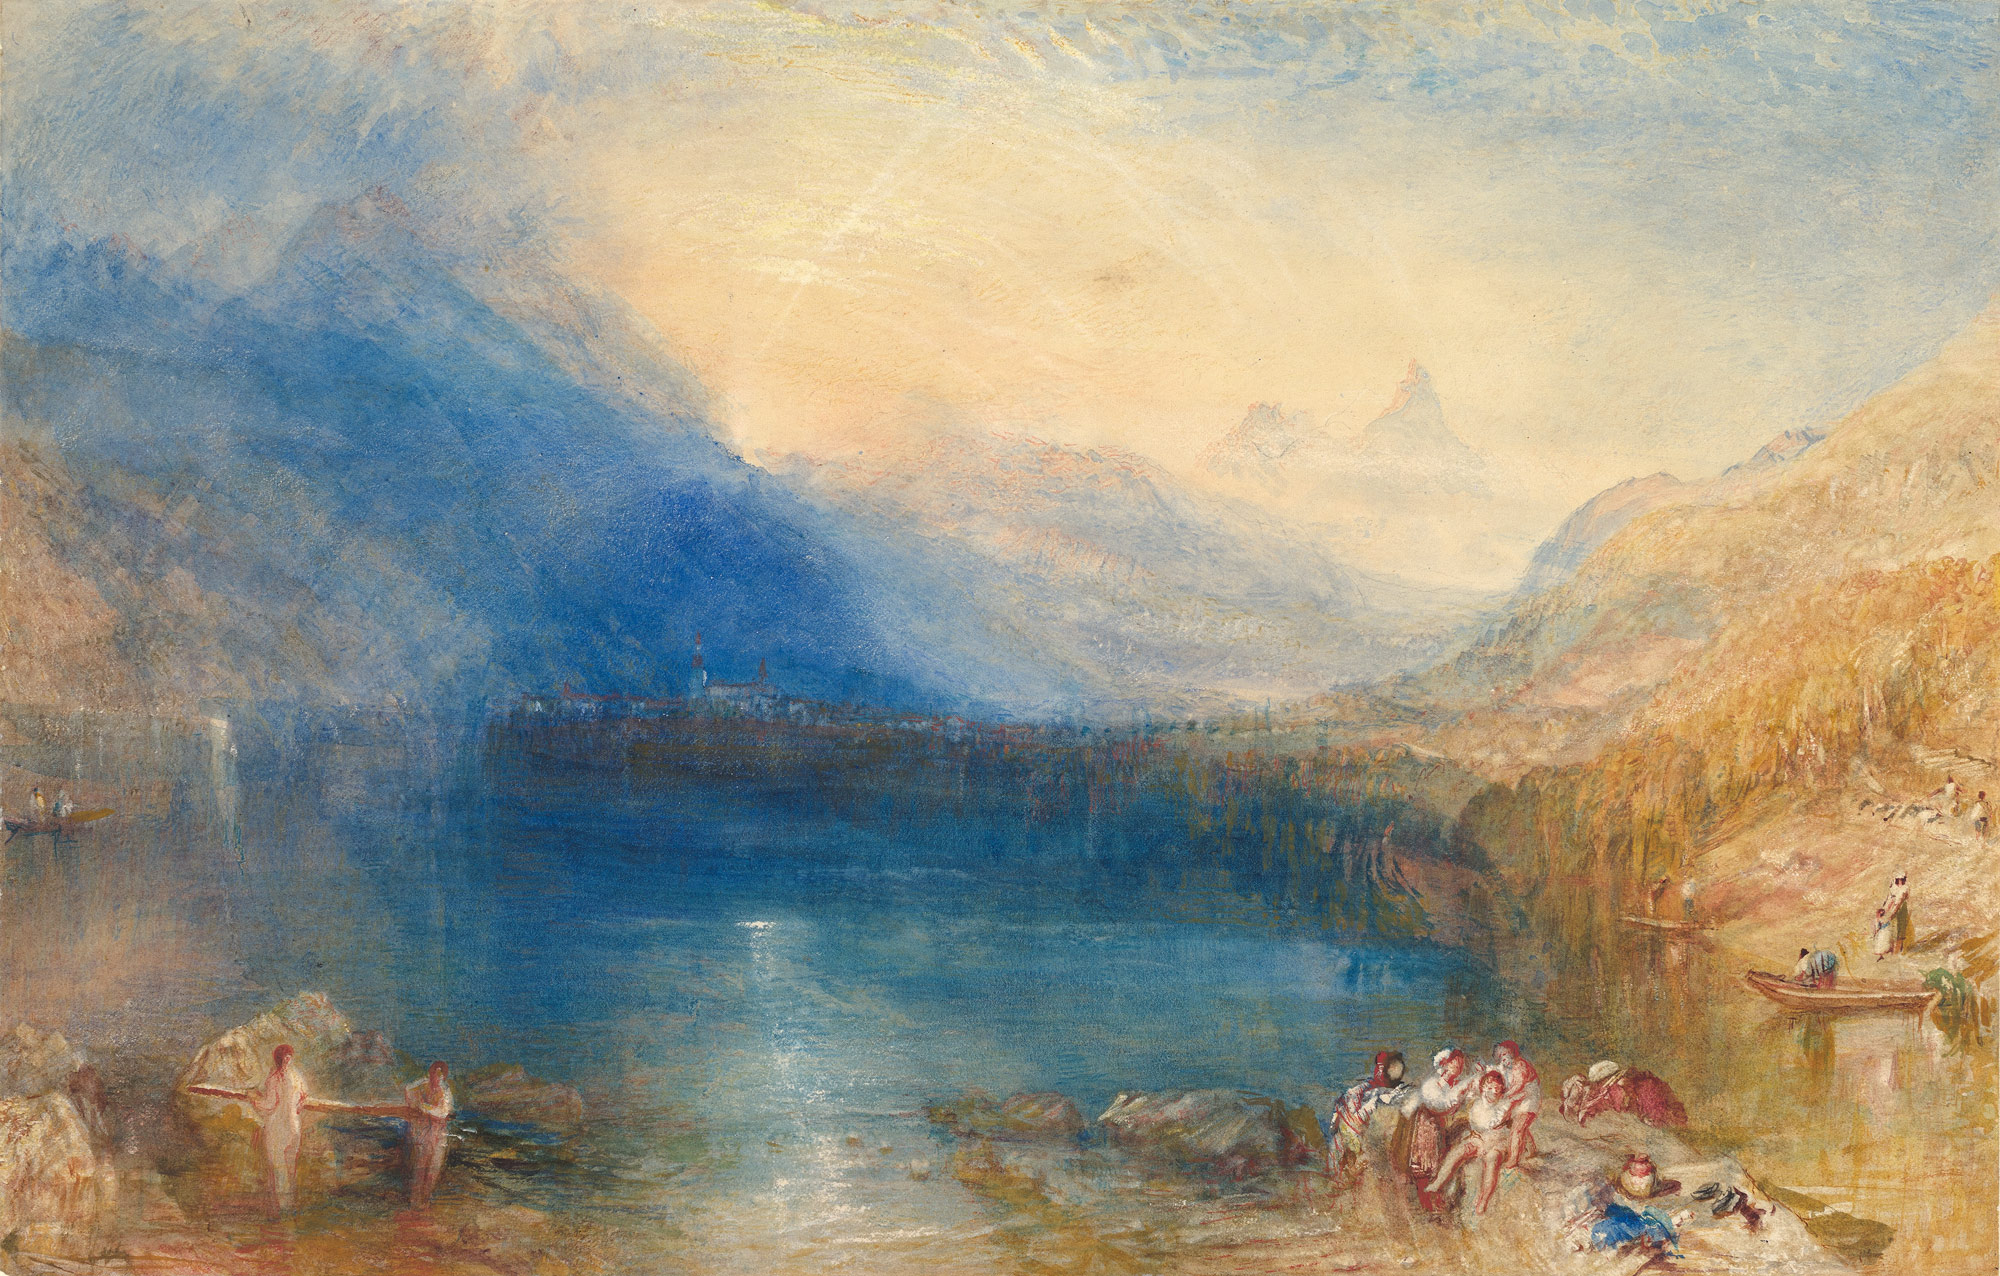 The Lake of Zug by Joseph Mallord William Turner - 1843 - 11 3/4 x 18 3/8 in Metropolitan Museum of Art